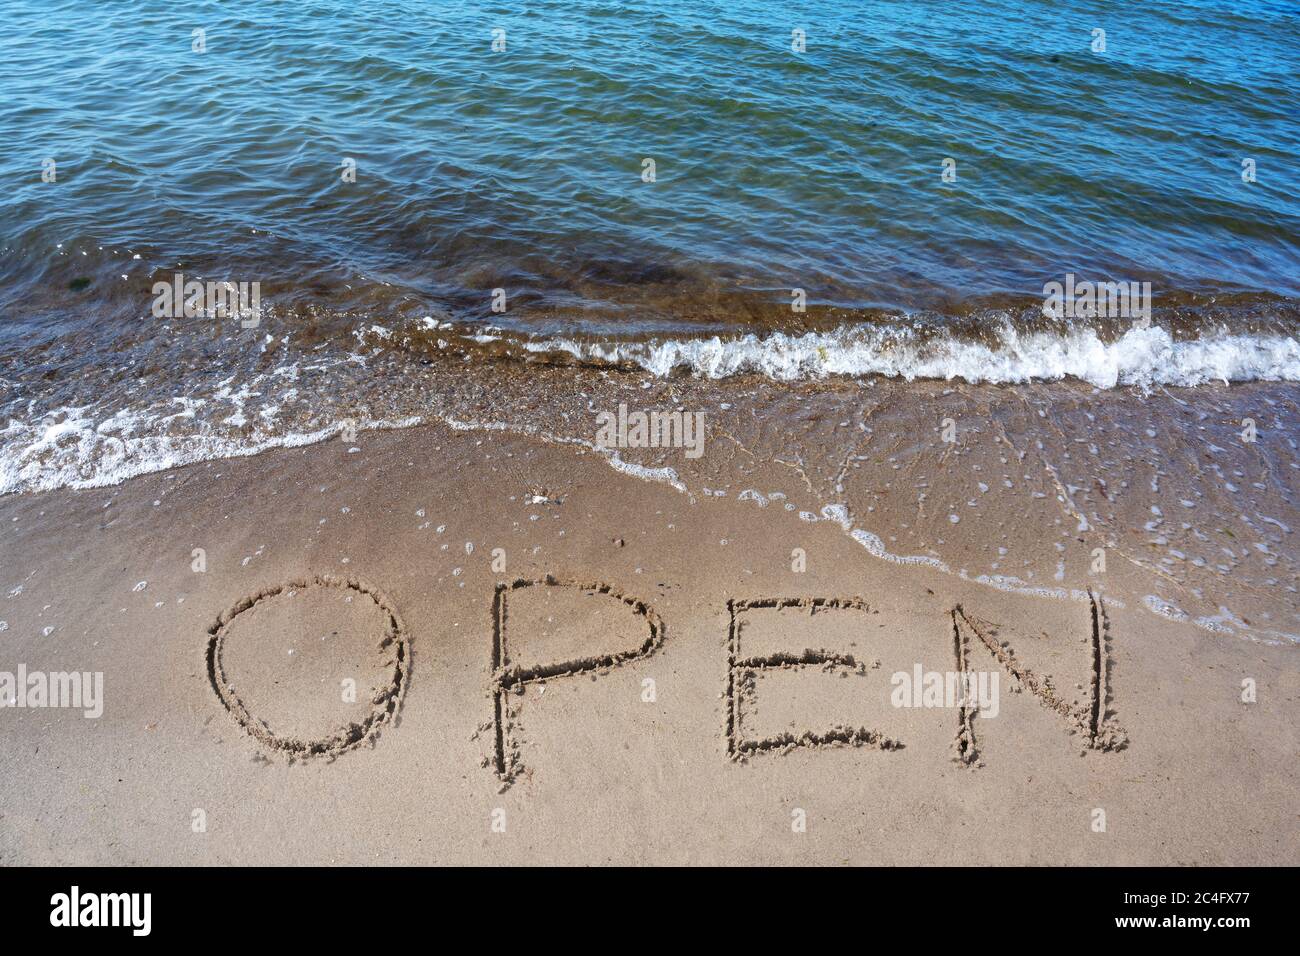 Word Open is written in the sand on the beach for the tourists, after the coronavirus pandemic, sea holidays are possible again, selected focus Stock Photo